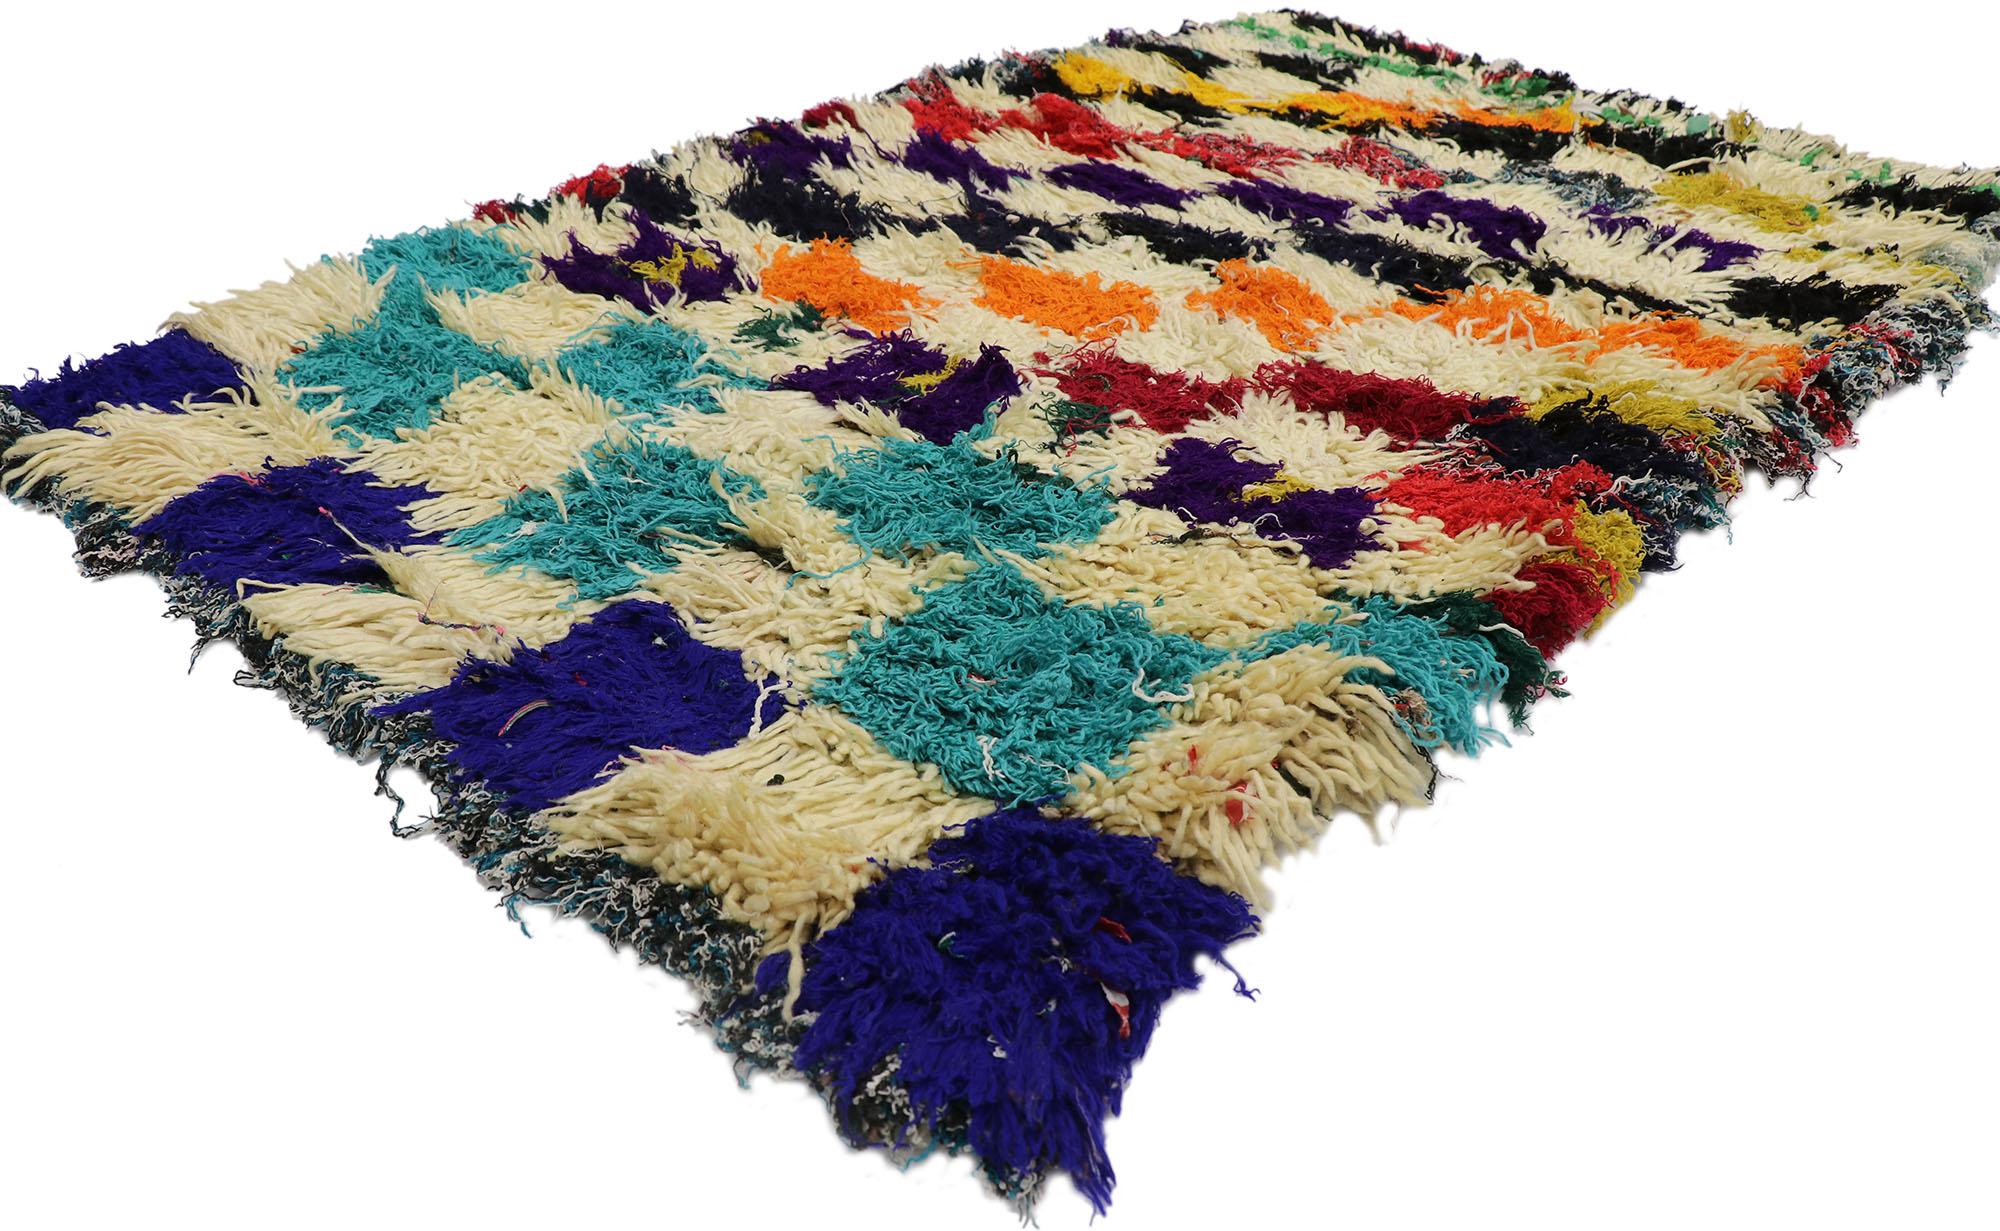 21592 Vintage Berber Moroccan Azilal Rug with Modern Cubist Style 03'07 x 05'05. Showcasing a bold expressive design, incredible detail and texture, this hand knotted cotton and wool vintage Berber Moroccan Azilal rug is a captivating vision of